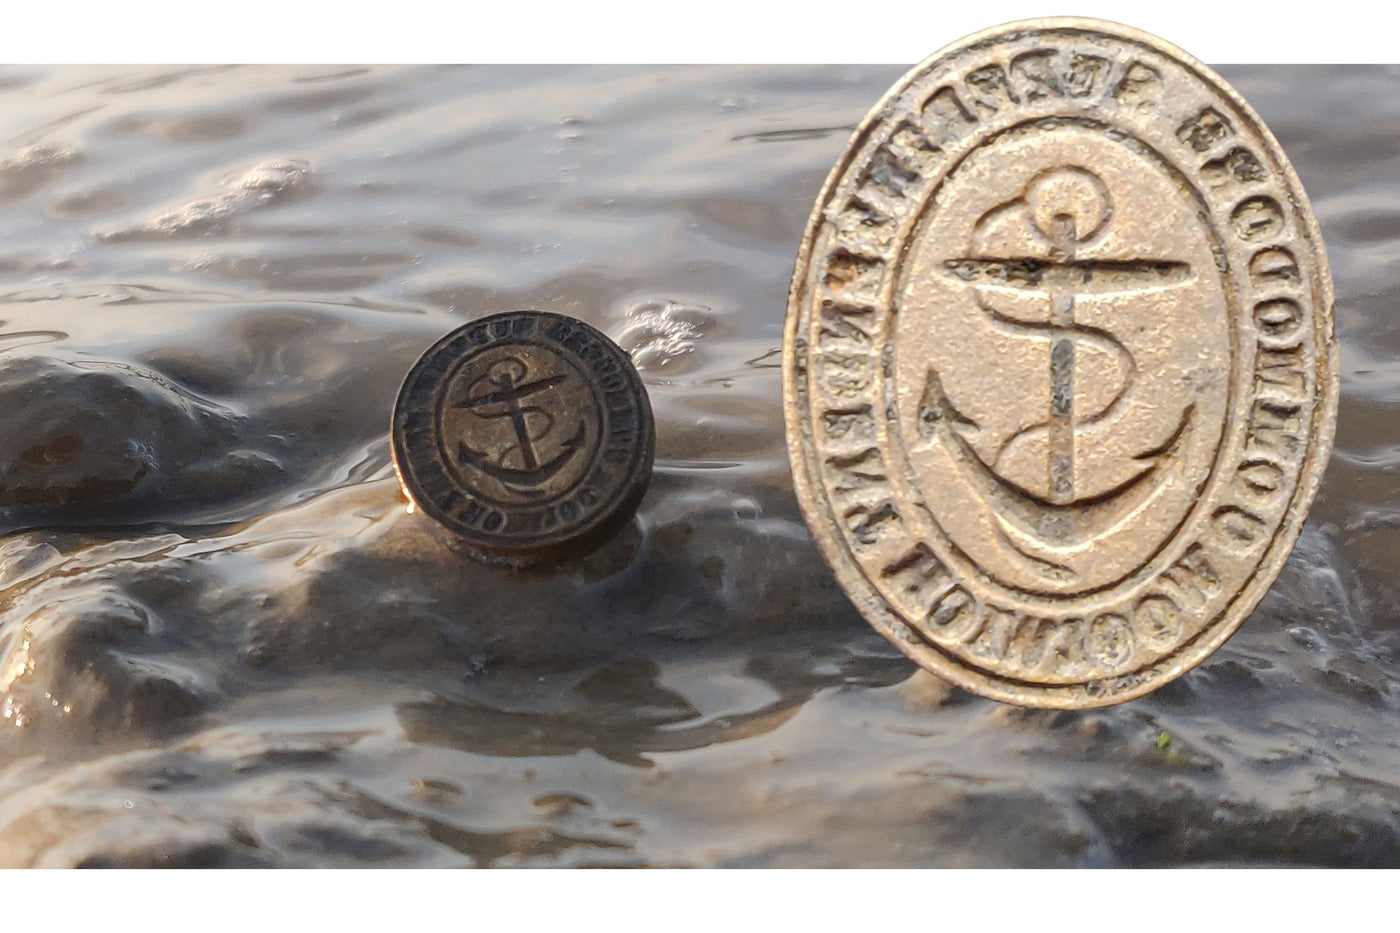 A 19th Century wax seal stamp washing up onshore with a clean image of the stamp beside it